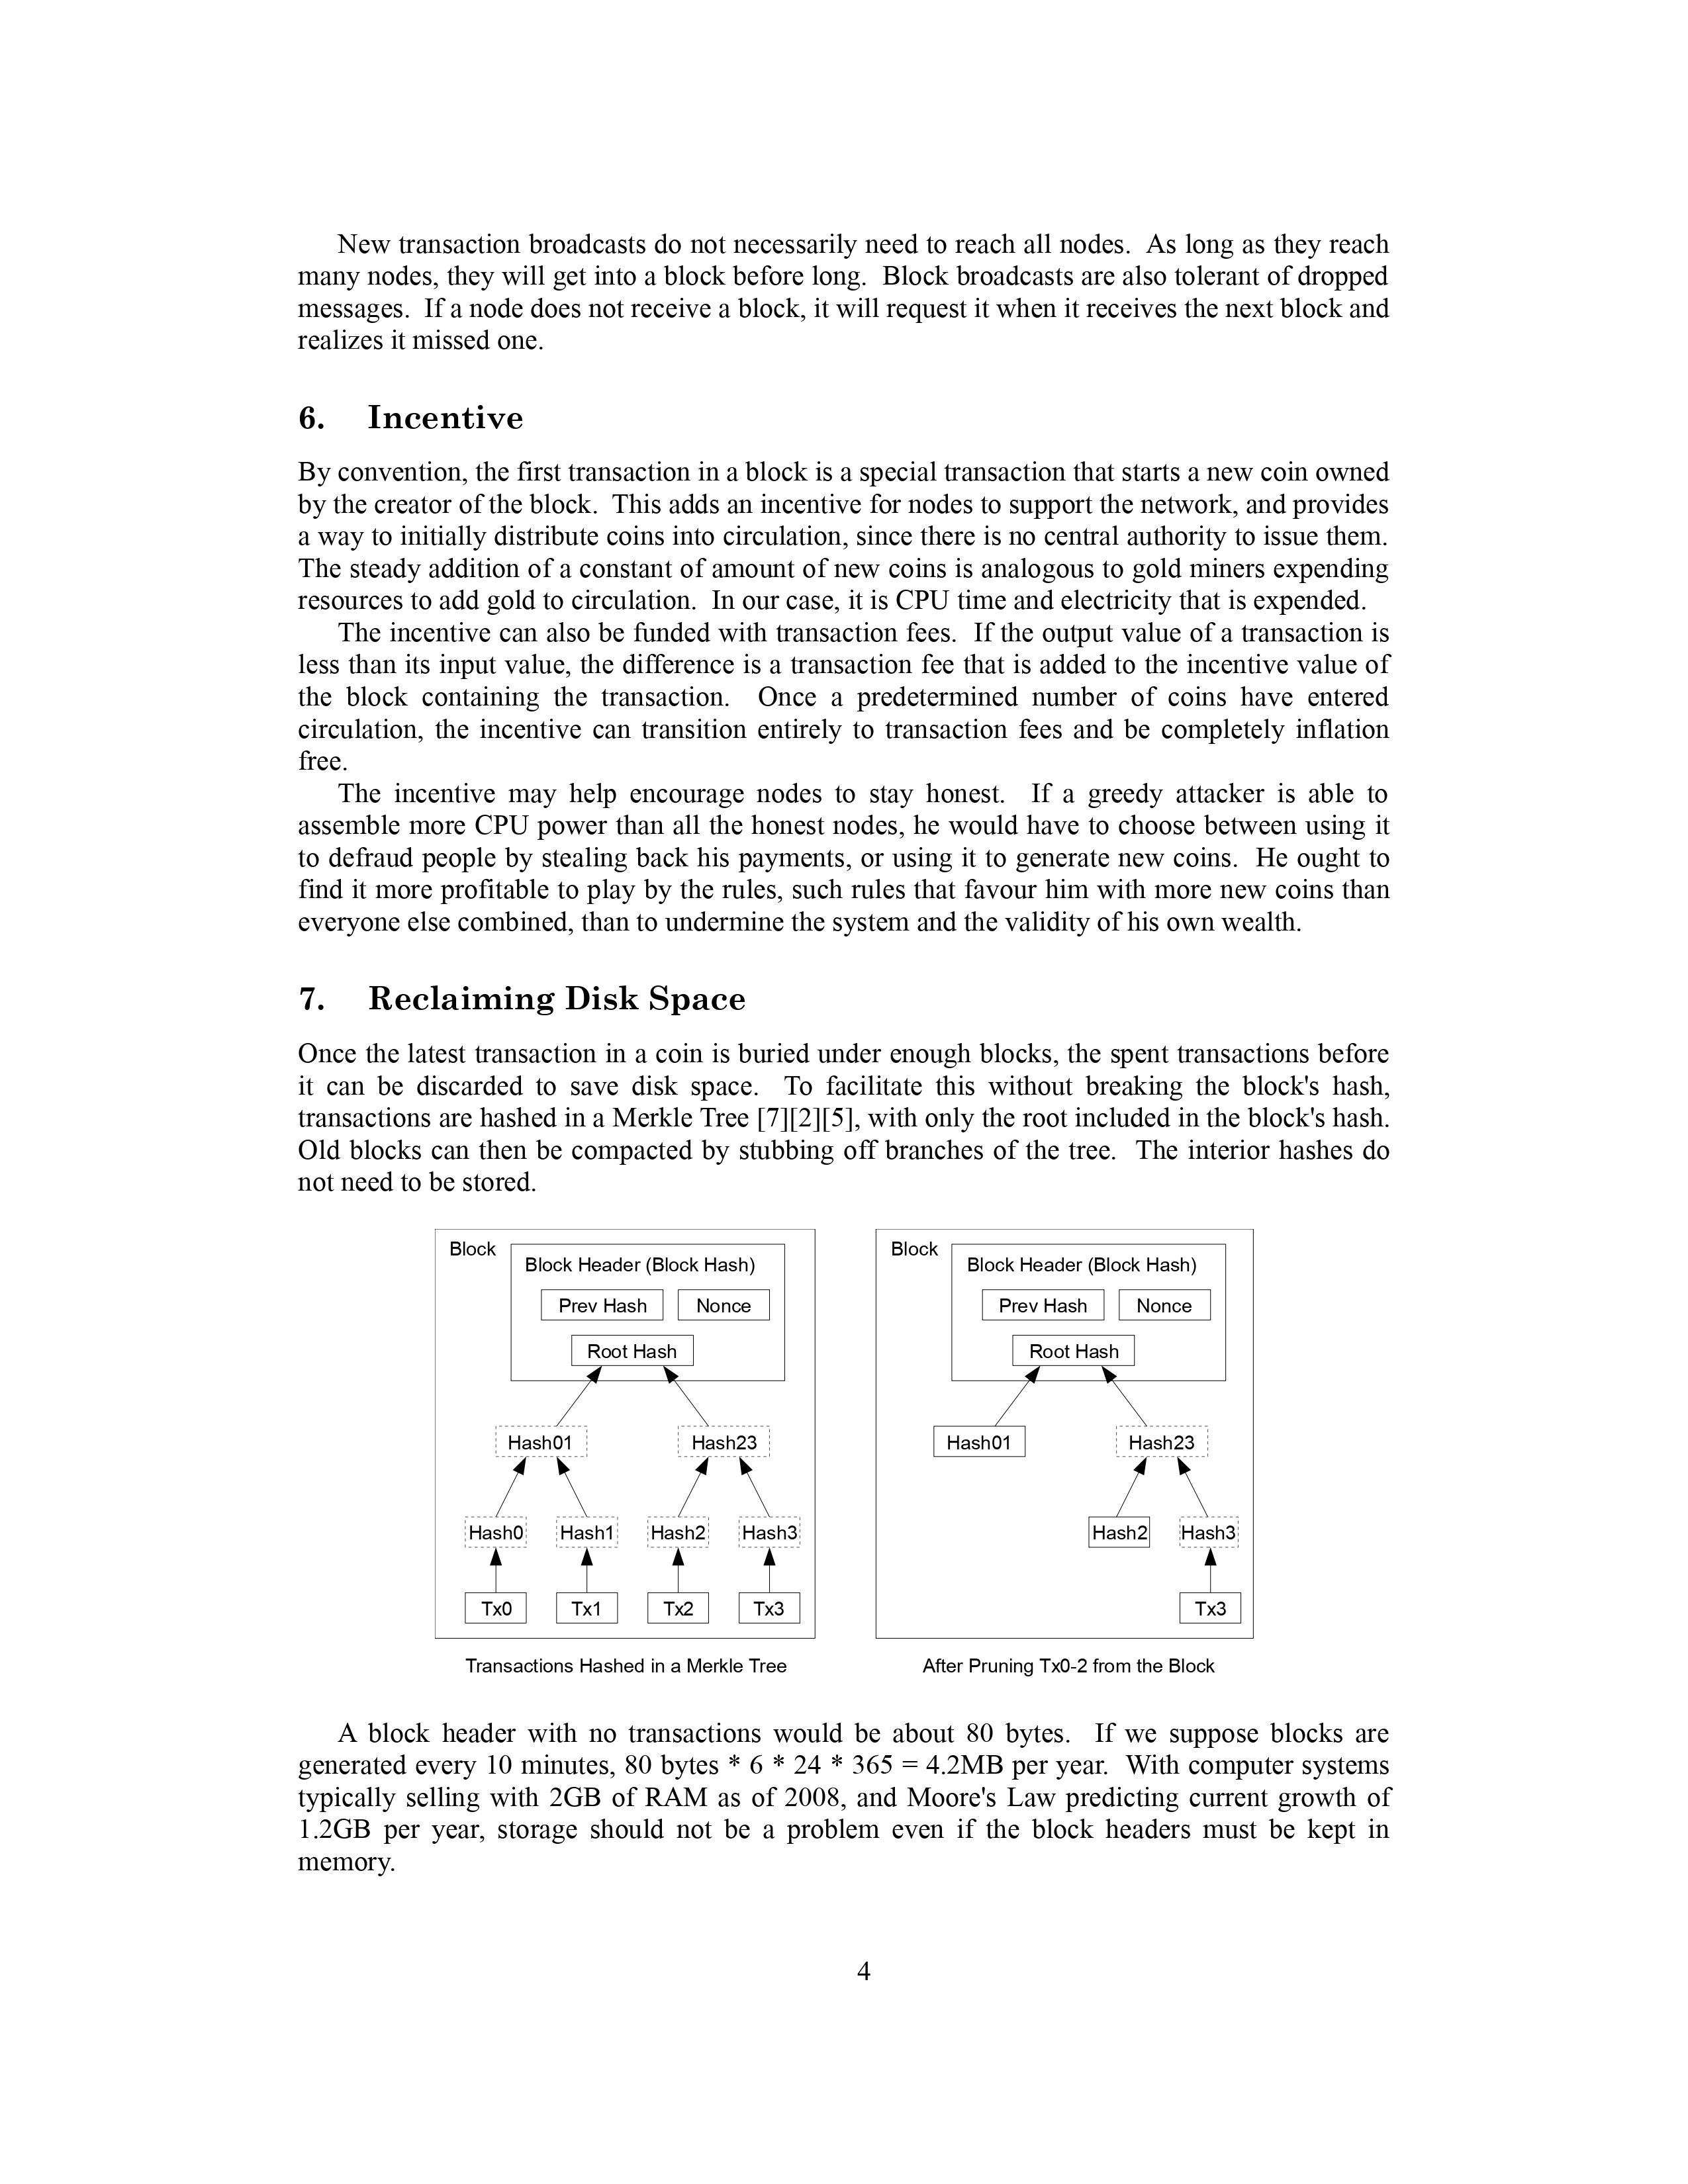 Bitcoin Whitepaper Page 4